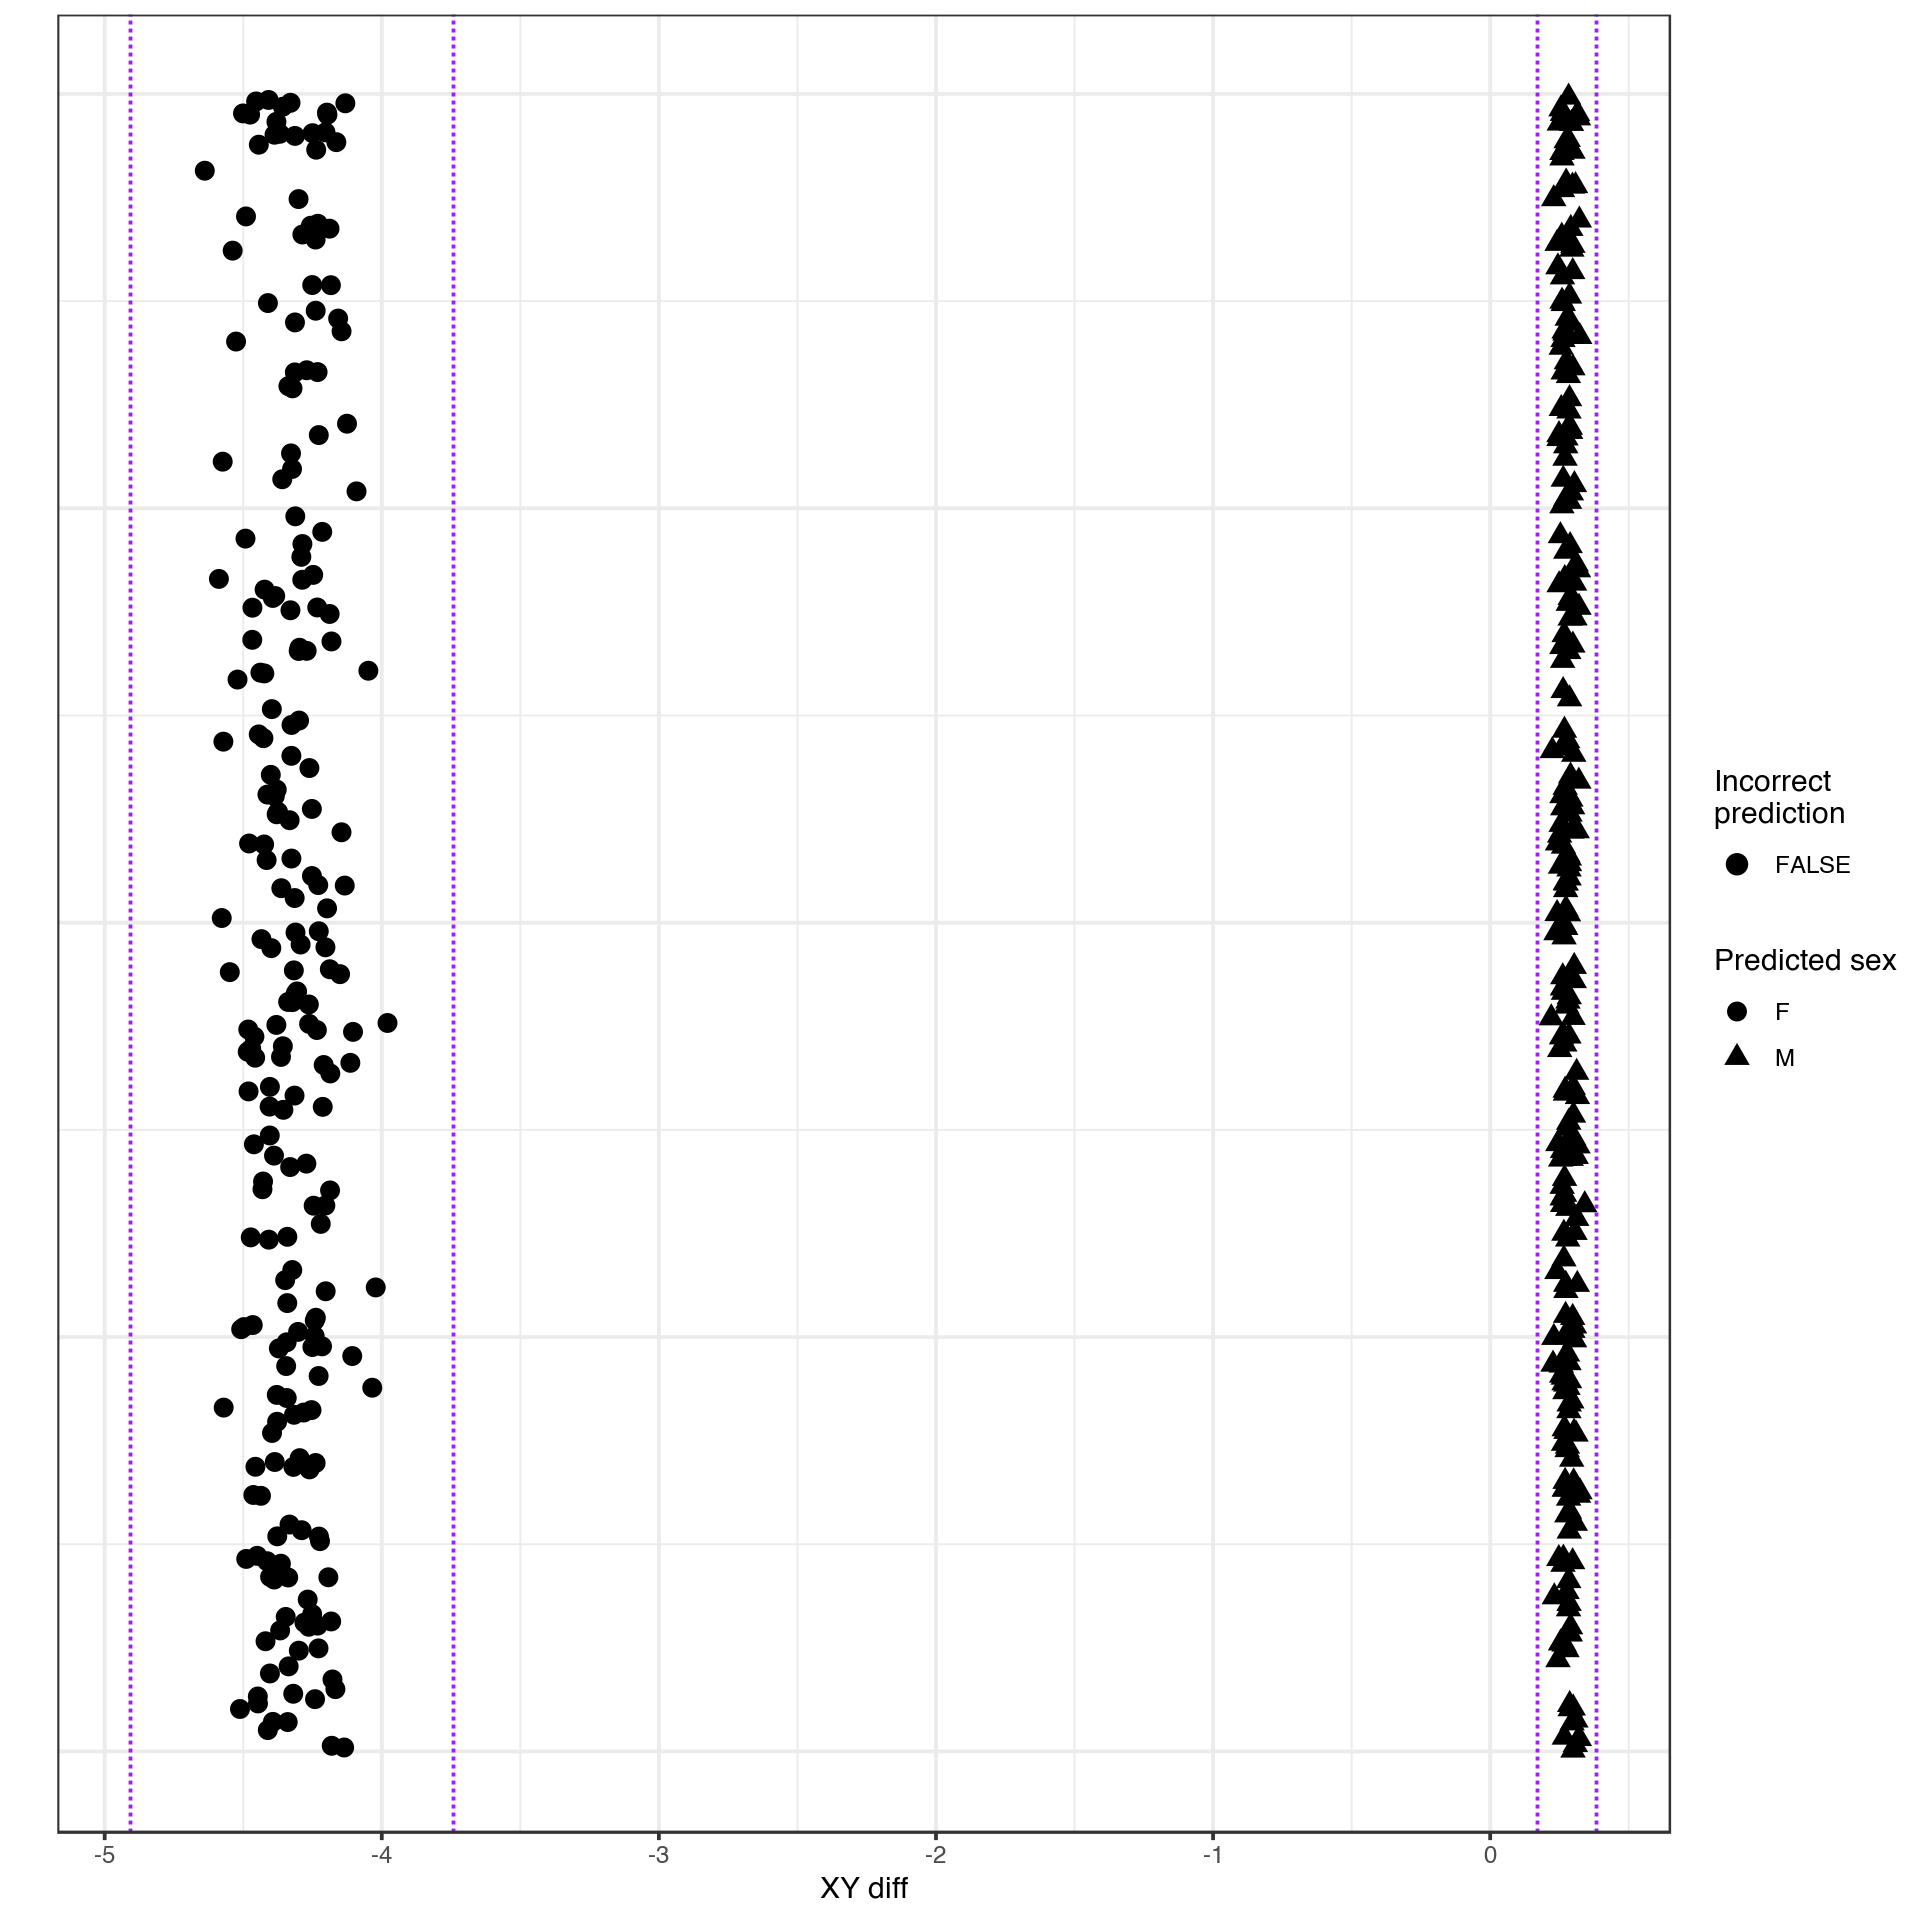 Predicted sex of each sample based on the sex chromosome copy numbers inferred from probe intensities for the EPIC array data. Mismatches between the predicted sex and that asserted in the sample annotation metadata are shown in red. Plot generated by meffil QC report.